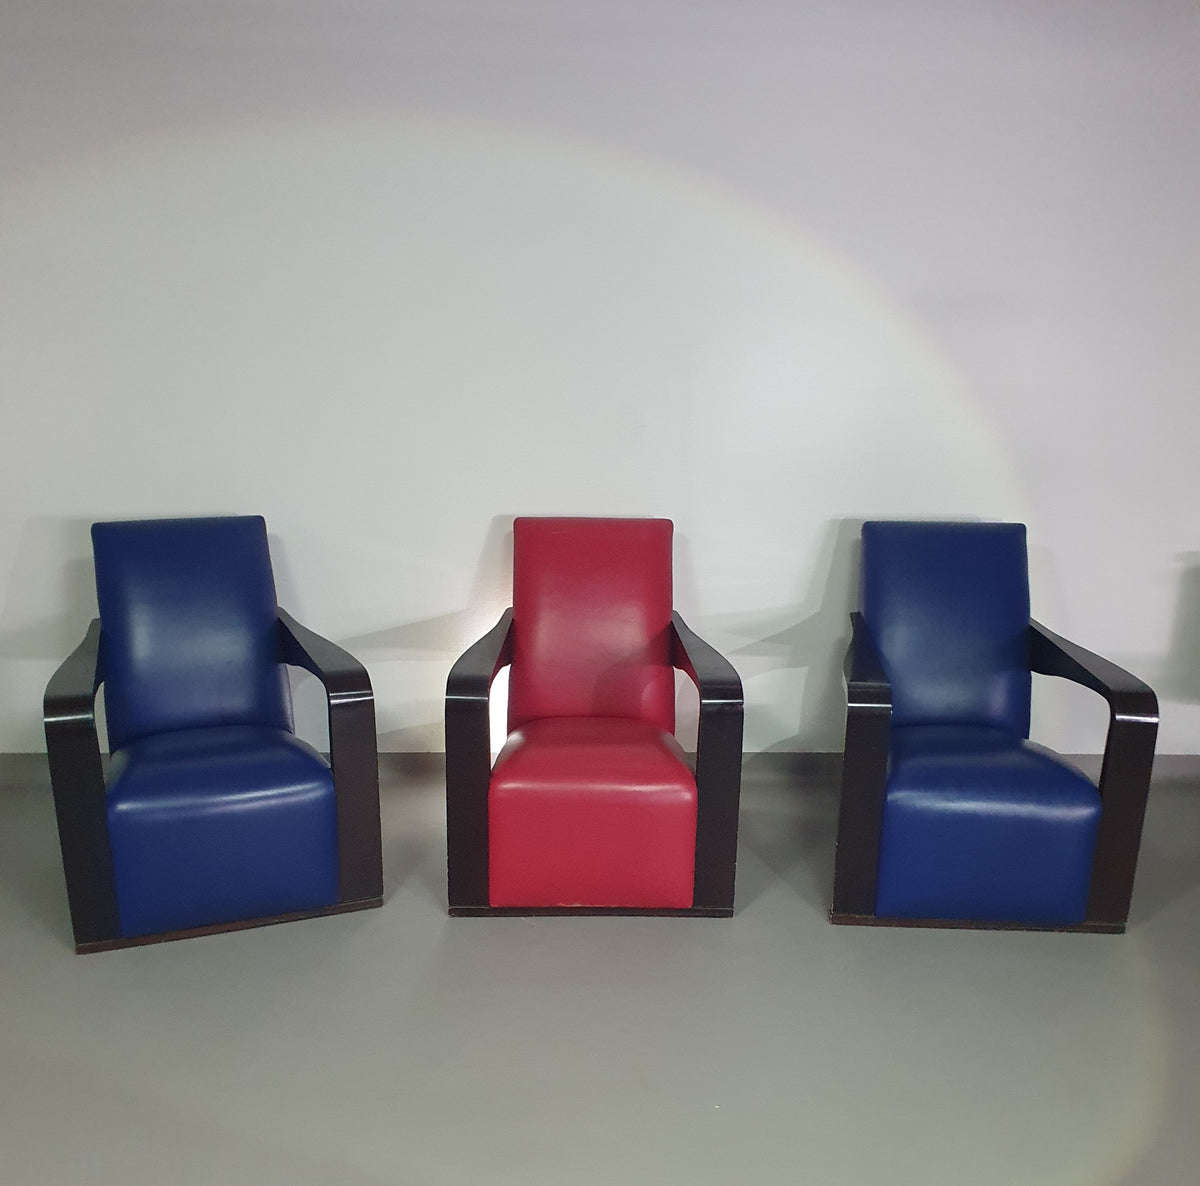 4 x Vintage Ying lounge chairs / fauteuils van Hugues Chevalier, jaren 1990. 3 x blue / 1 x red leather. Special made in these colours for Tommy Hilfiger. With traces of use.